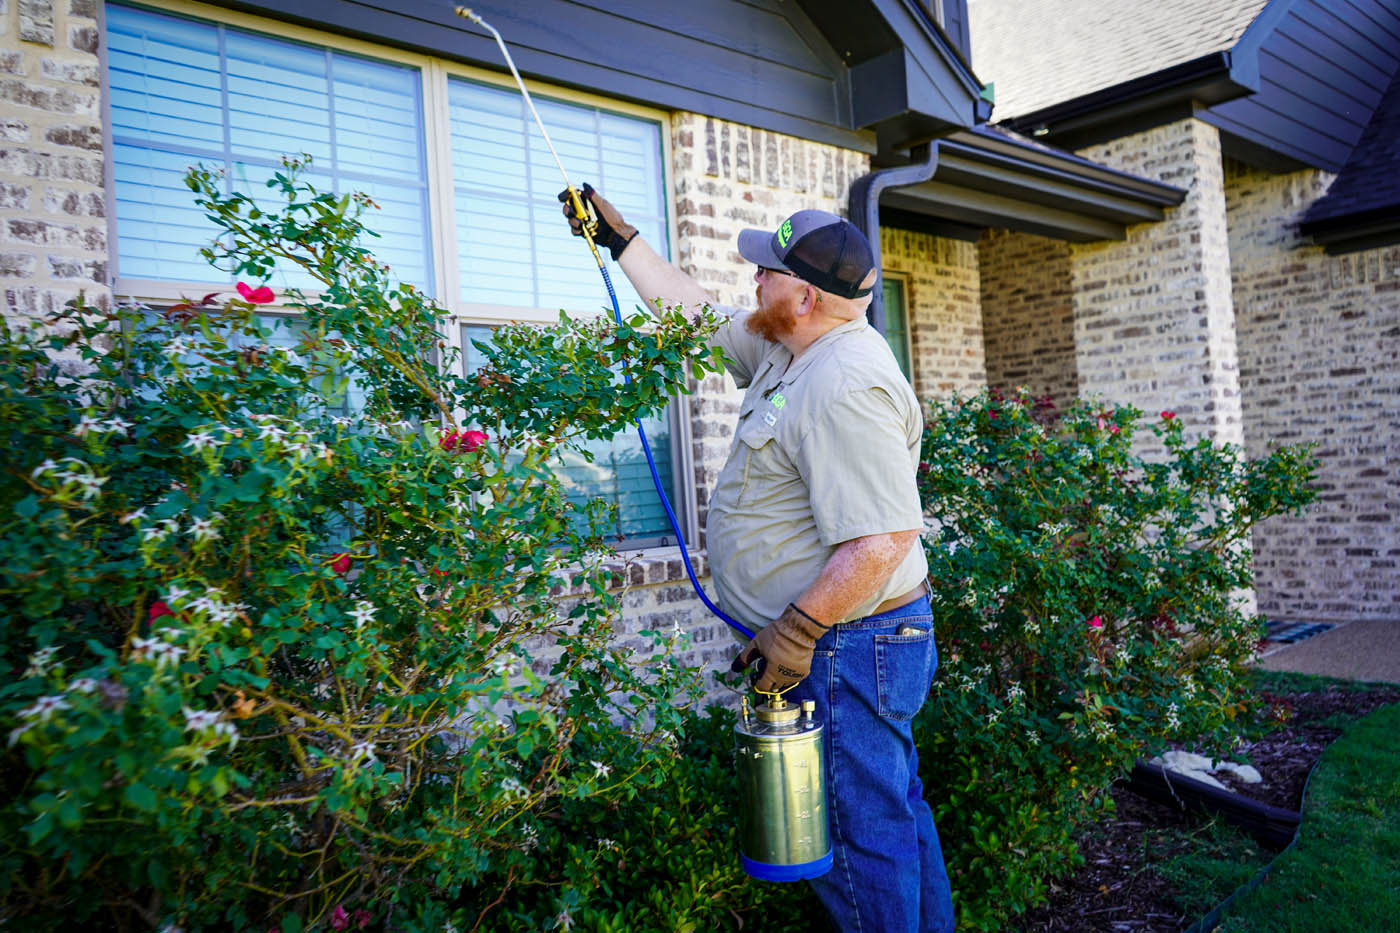 A GGA Pest Management technician working on a residential home.